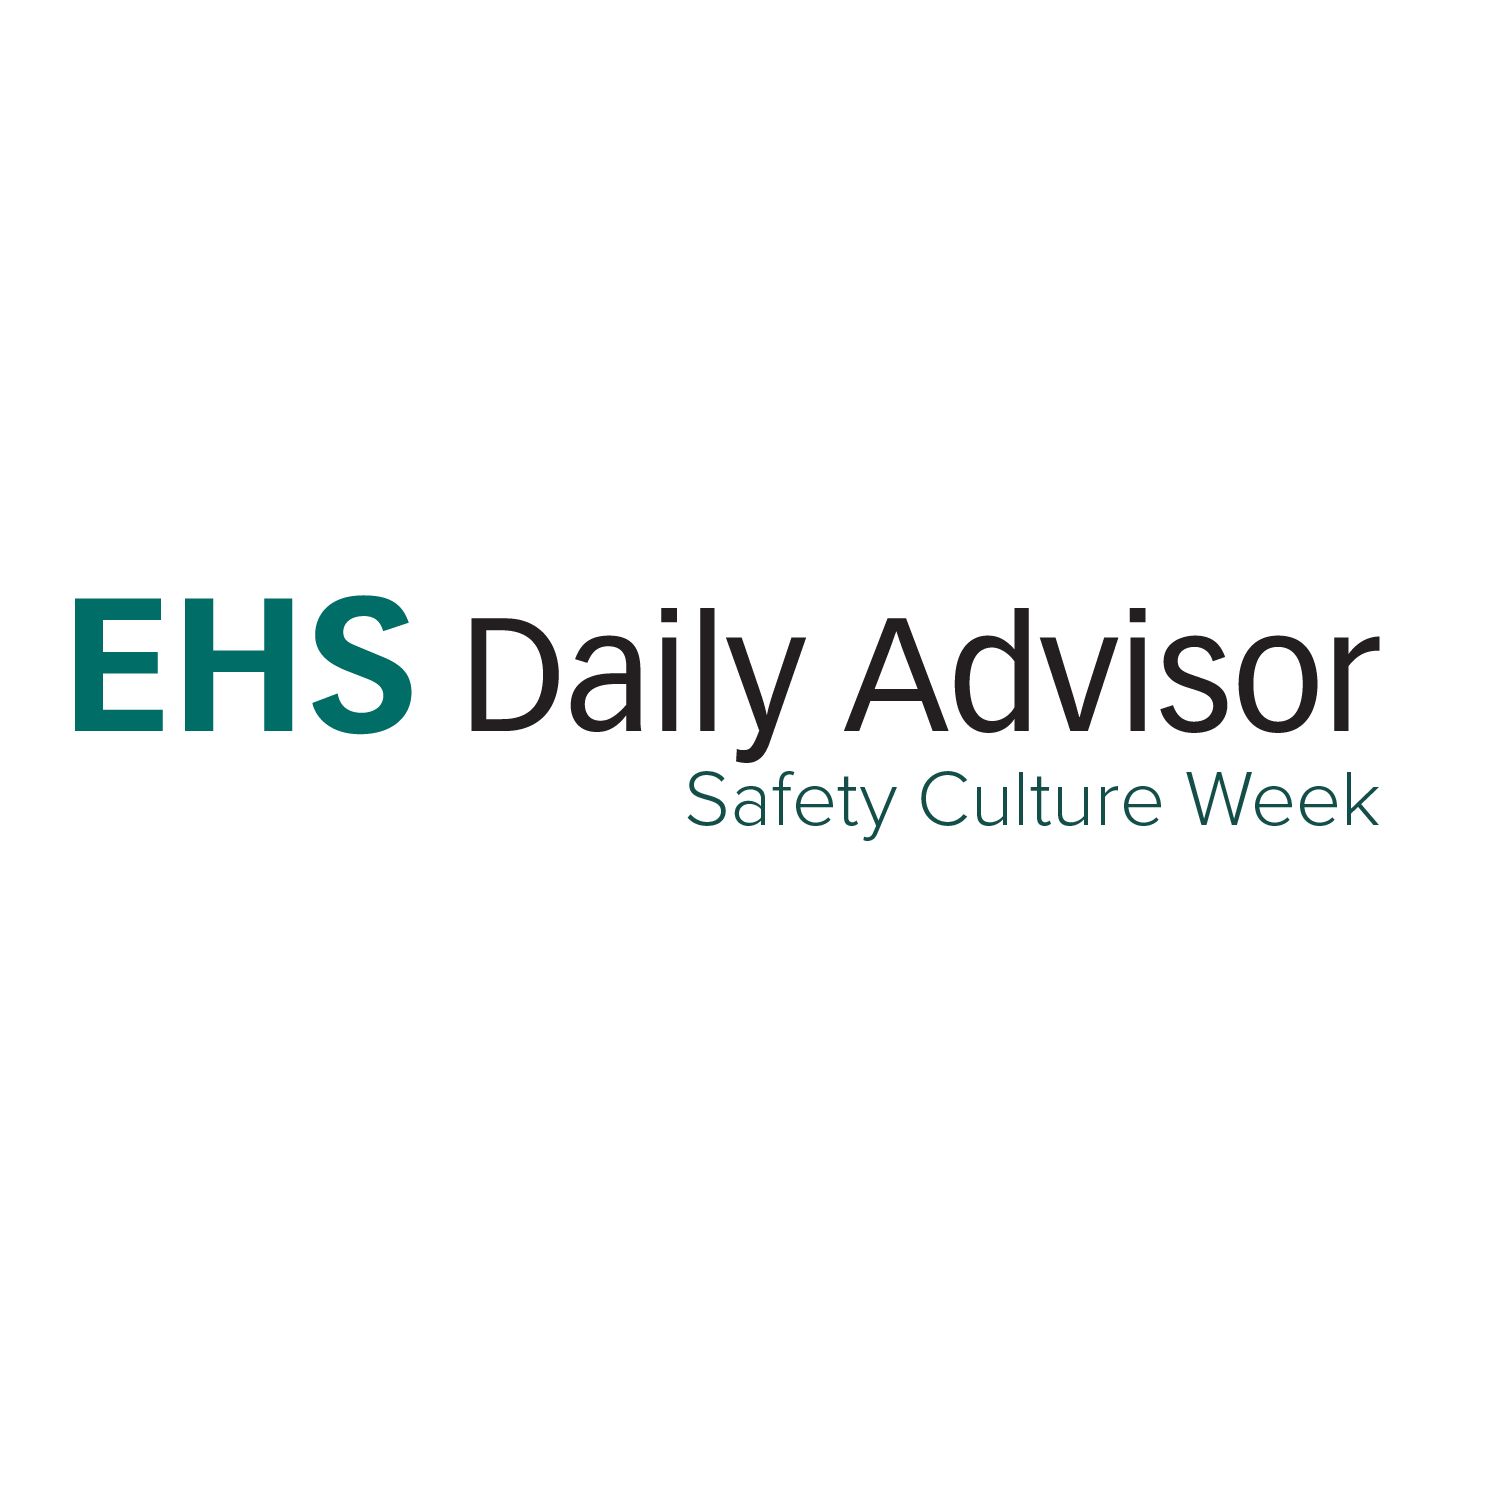 Safety Culture Week 2021 EHS Daily Advisor